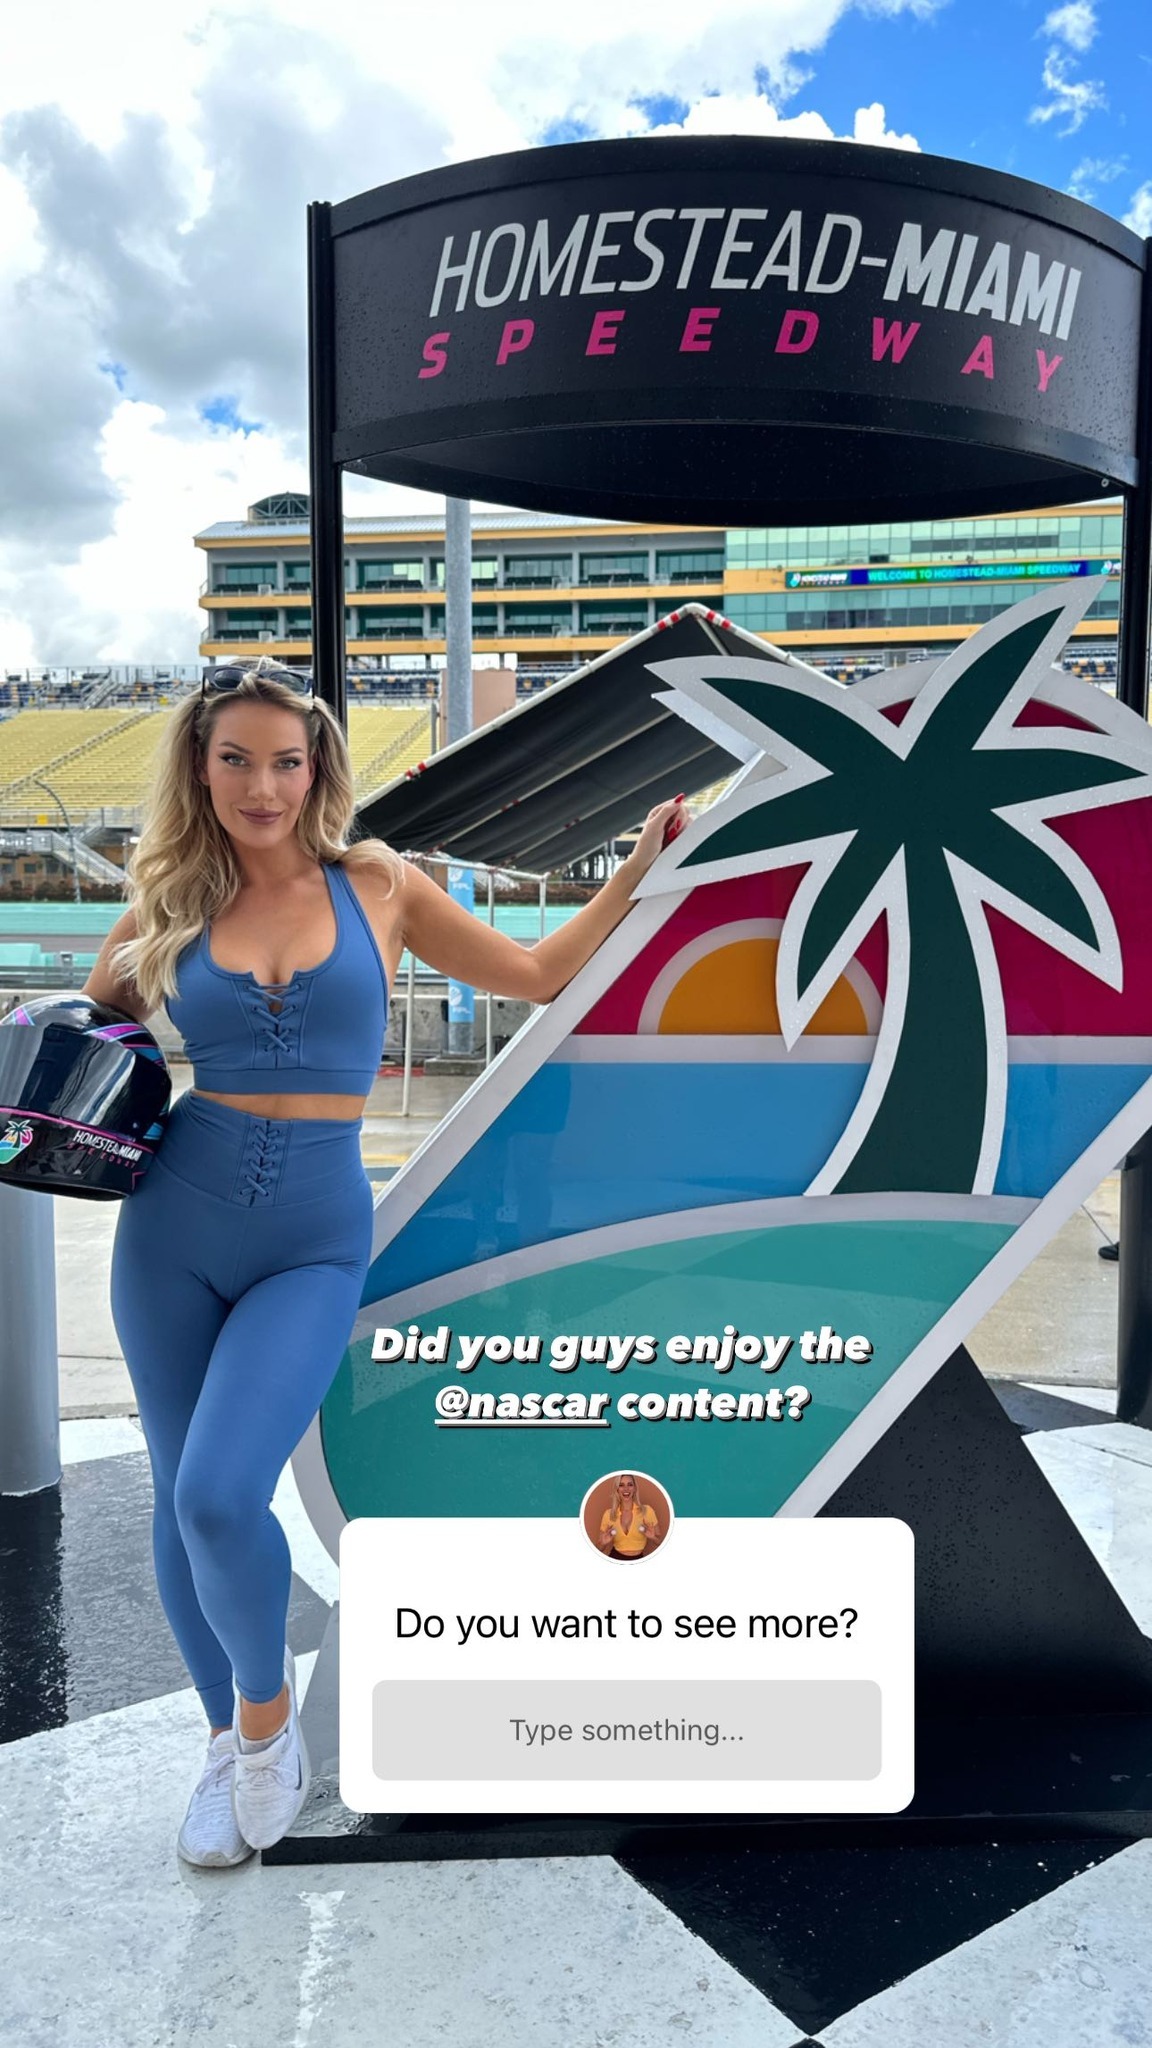 , Paige Spiranac flaunts figure in revealing outfit at Homestead Miami Speedway